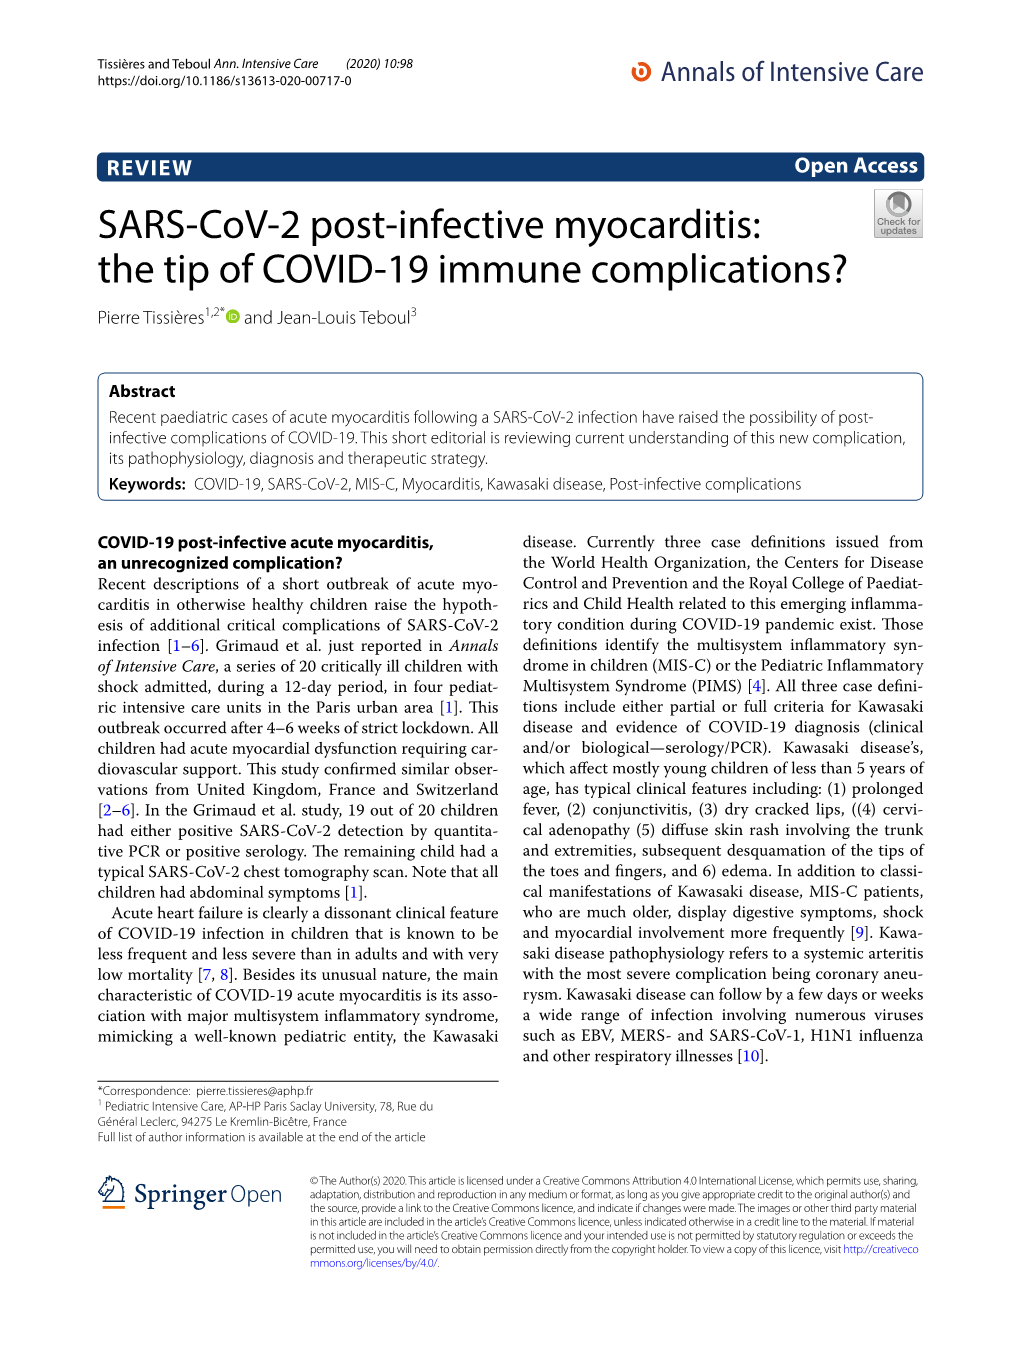 SARS-Cov-2 Post-Infective Myocarditis: the Tip of COVID-19